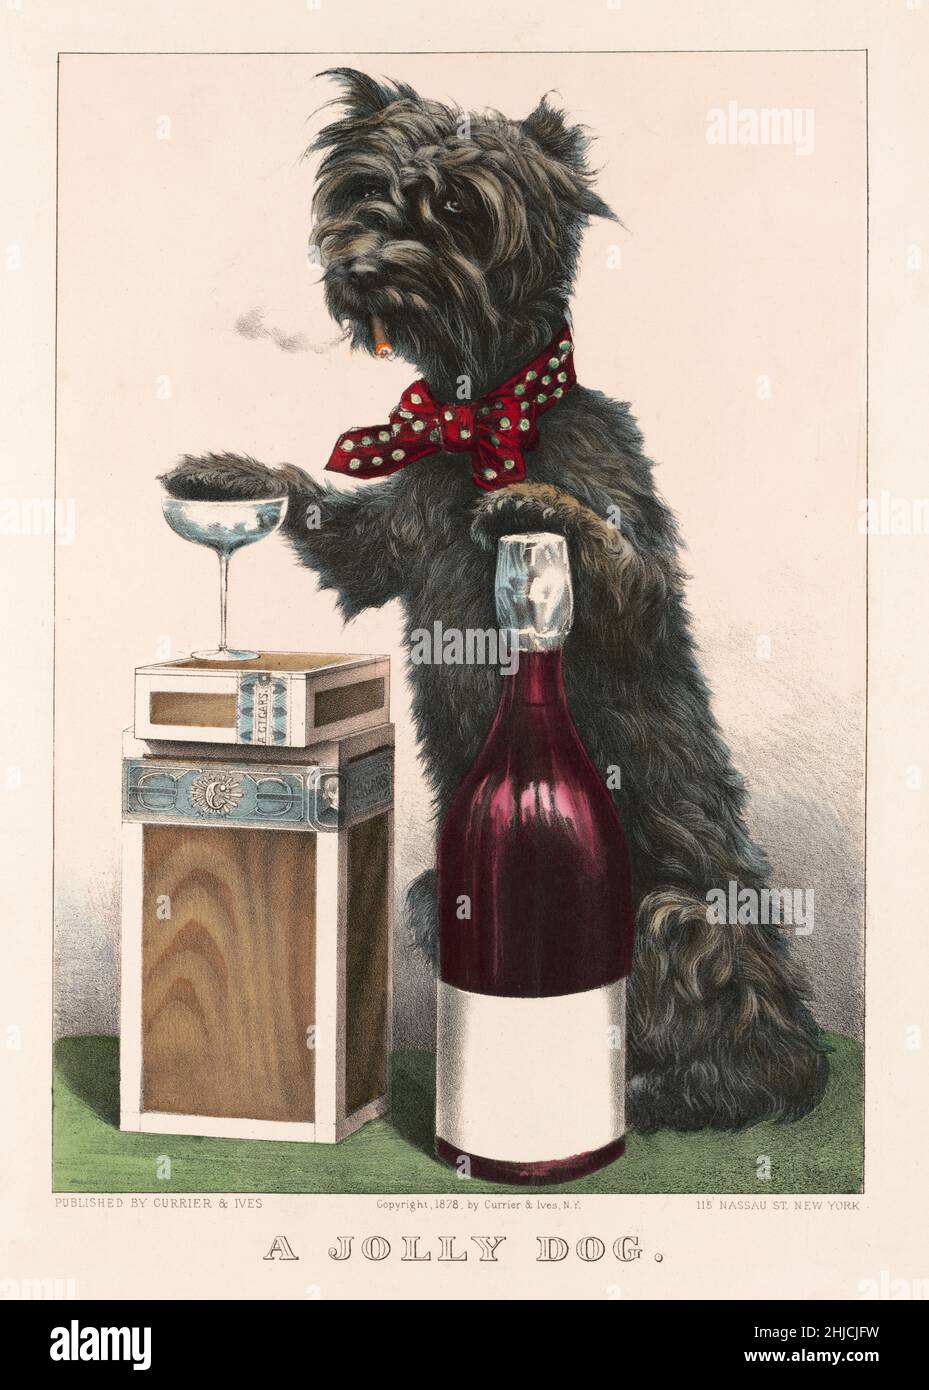 A jolly dog with cigars and booze. Hand-colored lithograph, Currier & Ives, 1878. Stock Photo